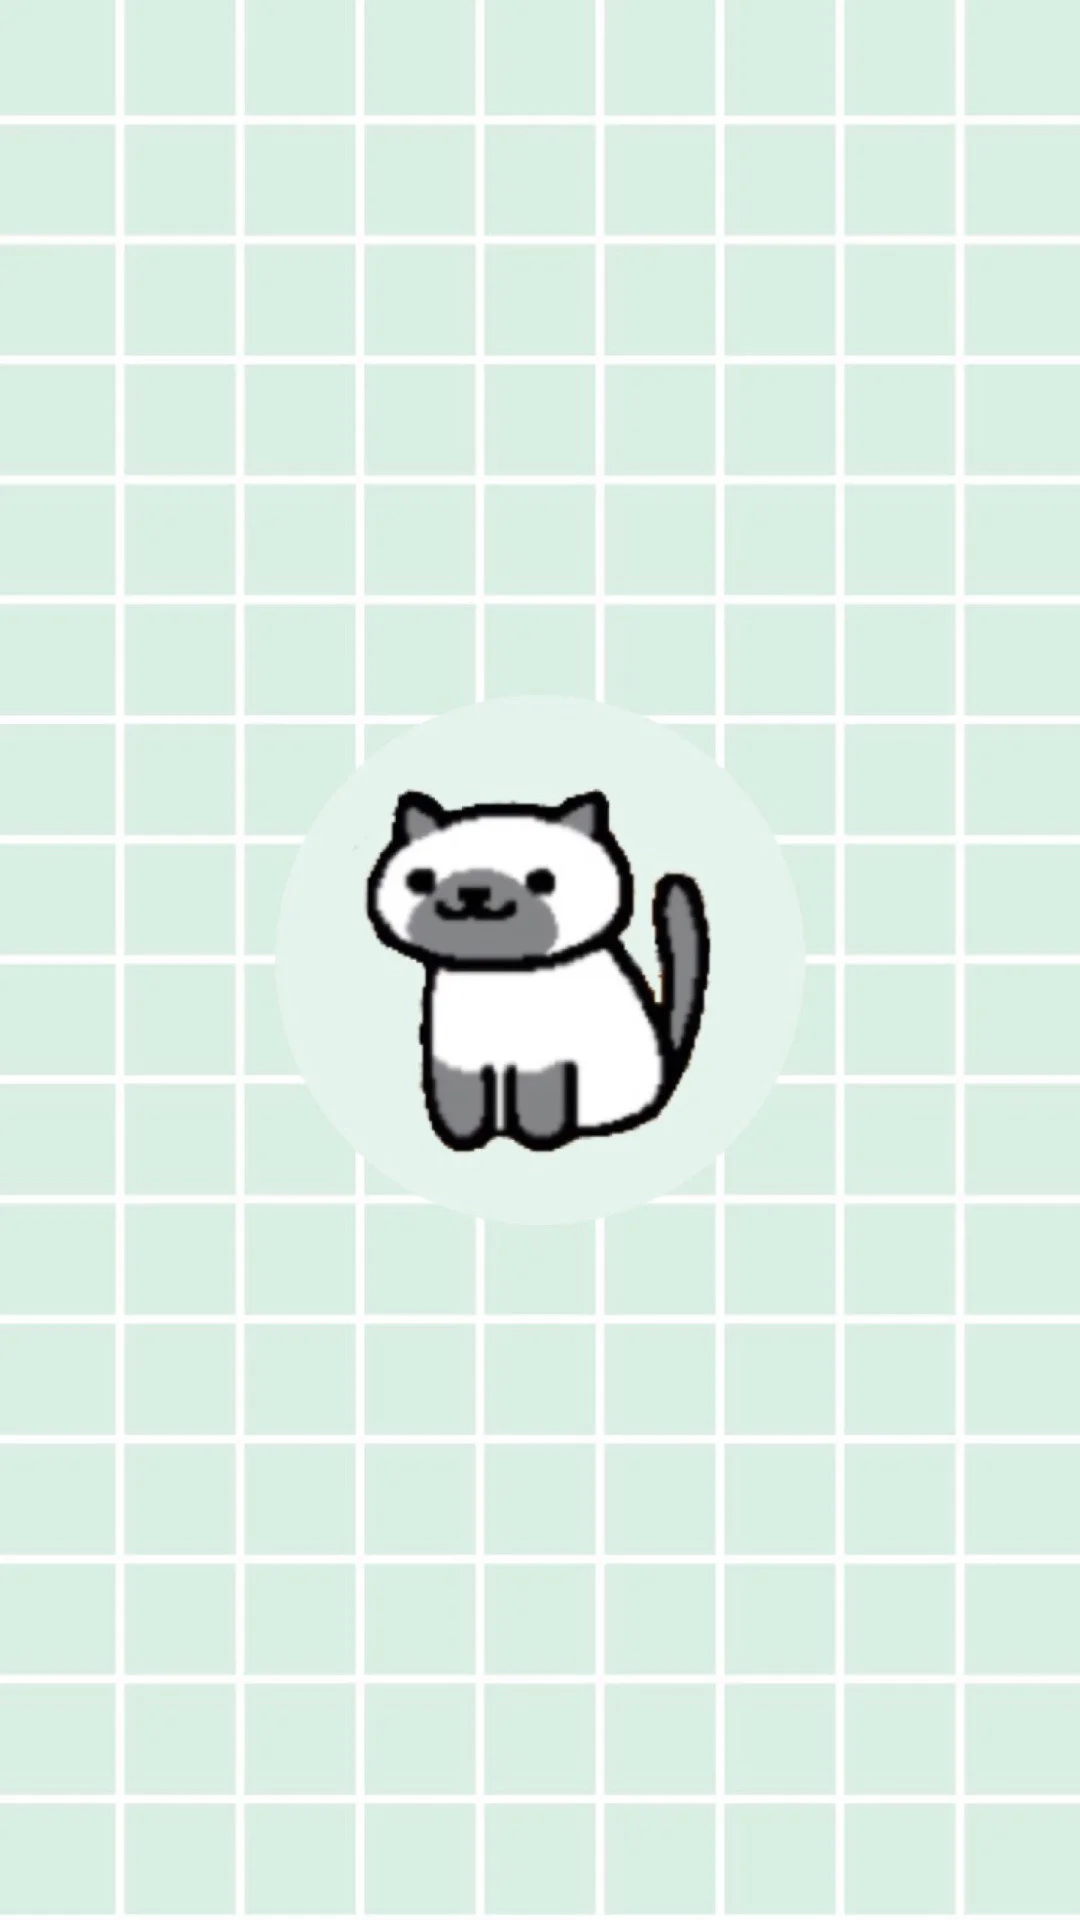 Tap to see more Neko Atsume the cat wallpapers, backgrounds,